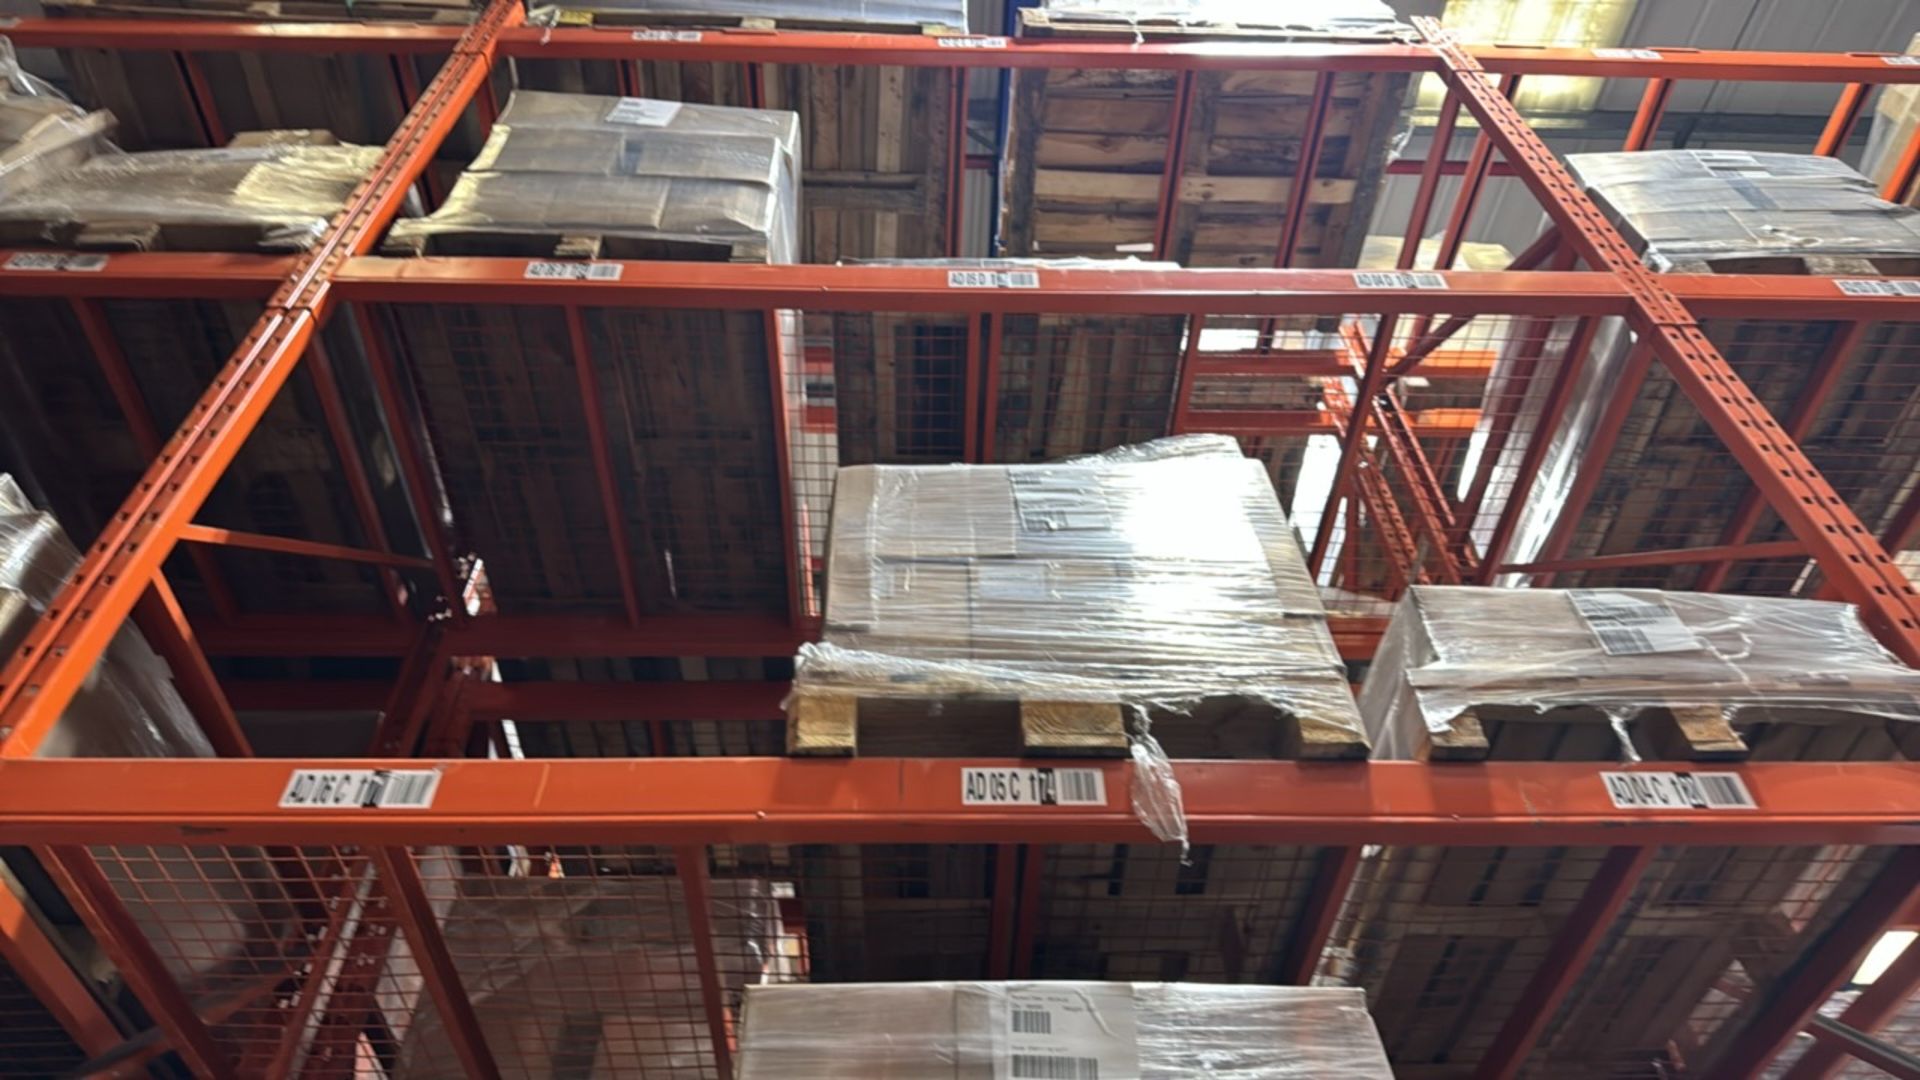 23 Bays Of Boltless Pallet Racking - Image 5 of 9